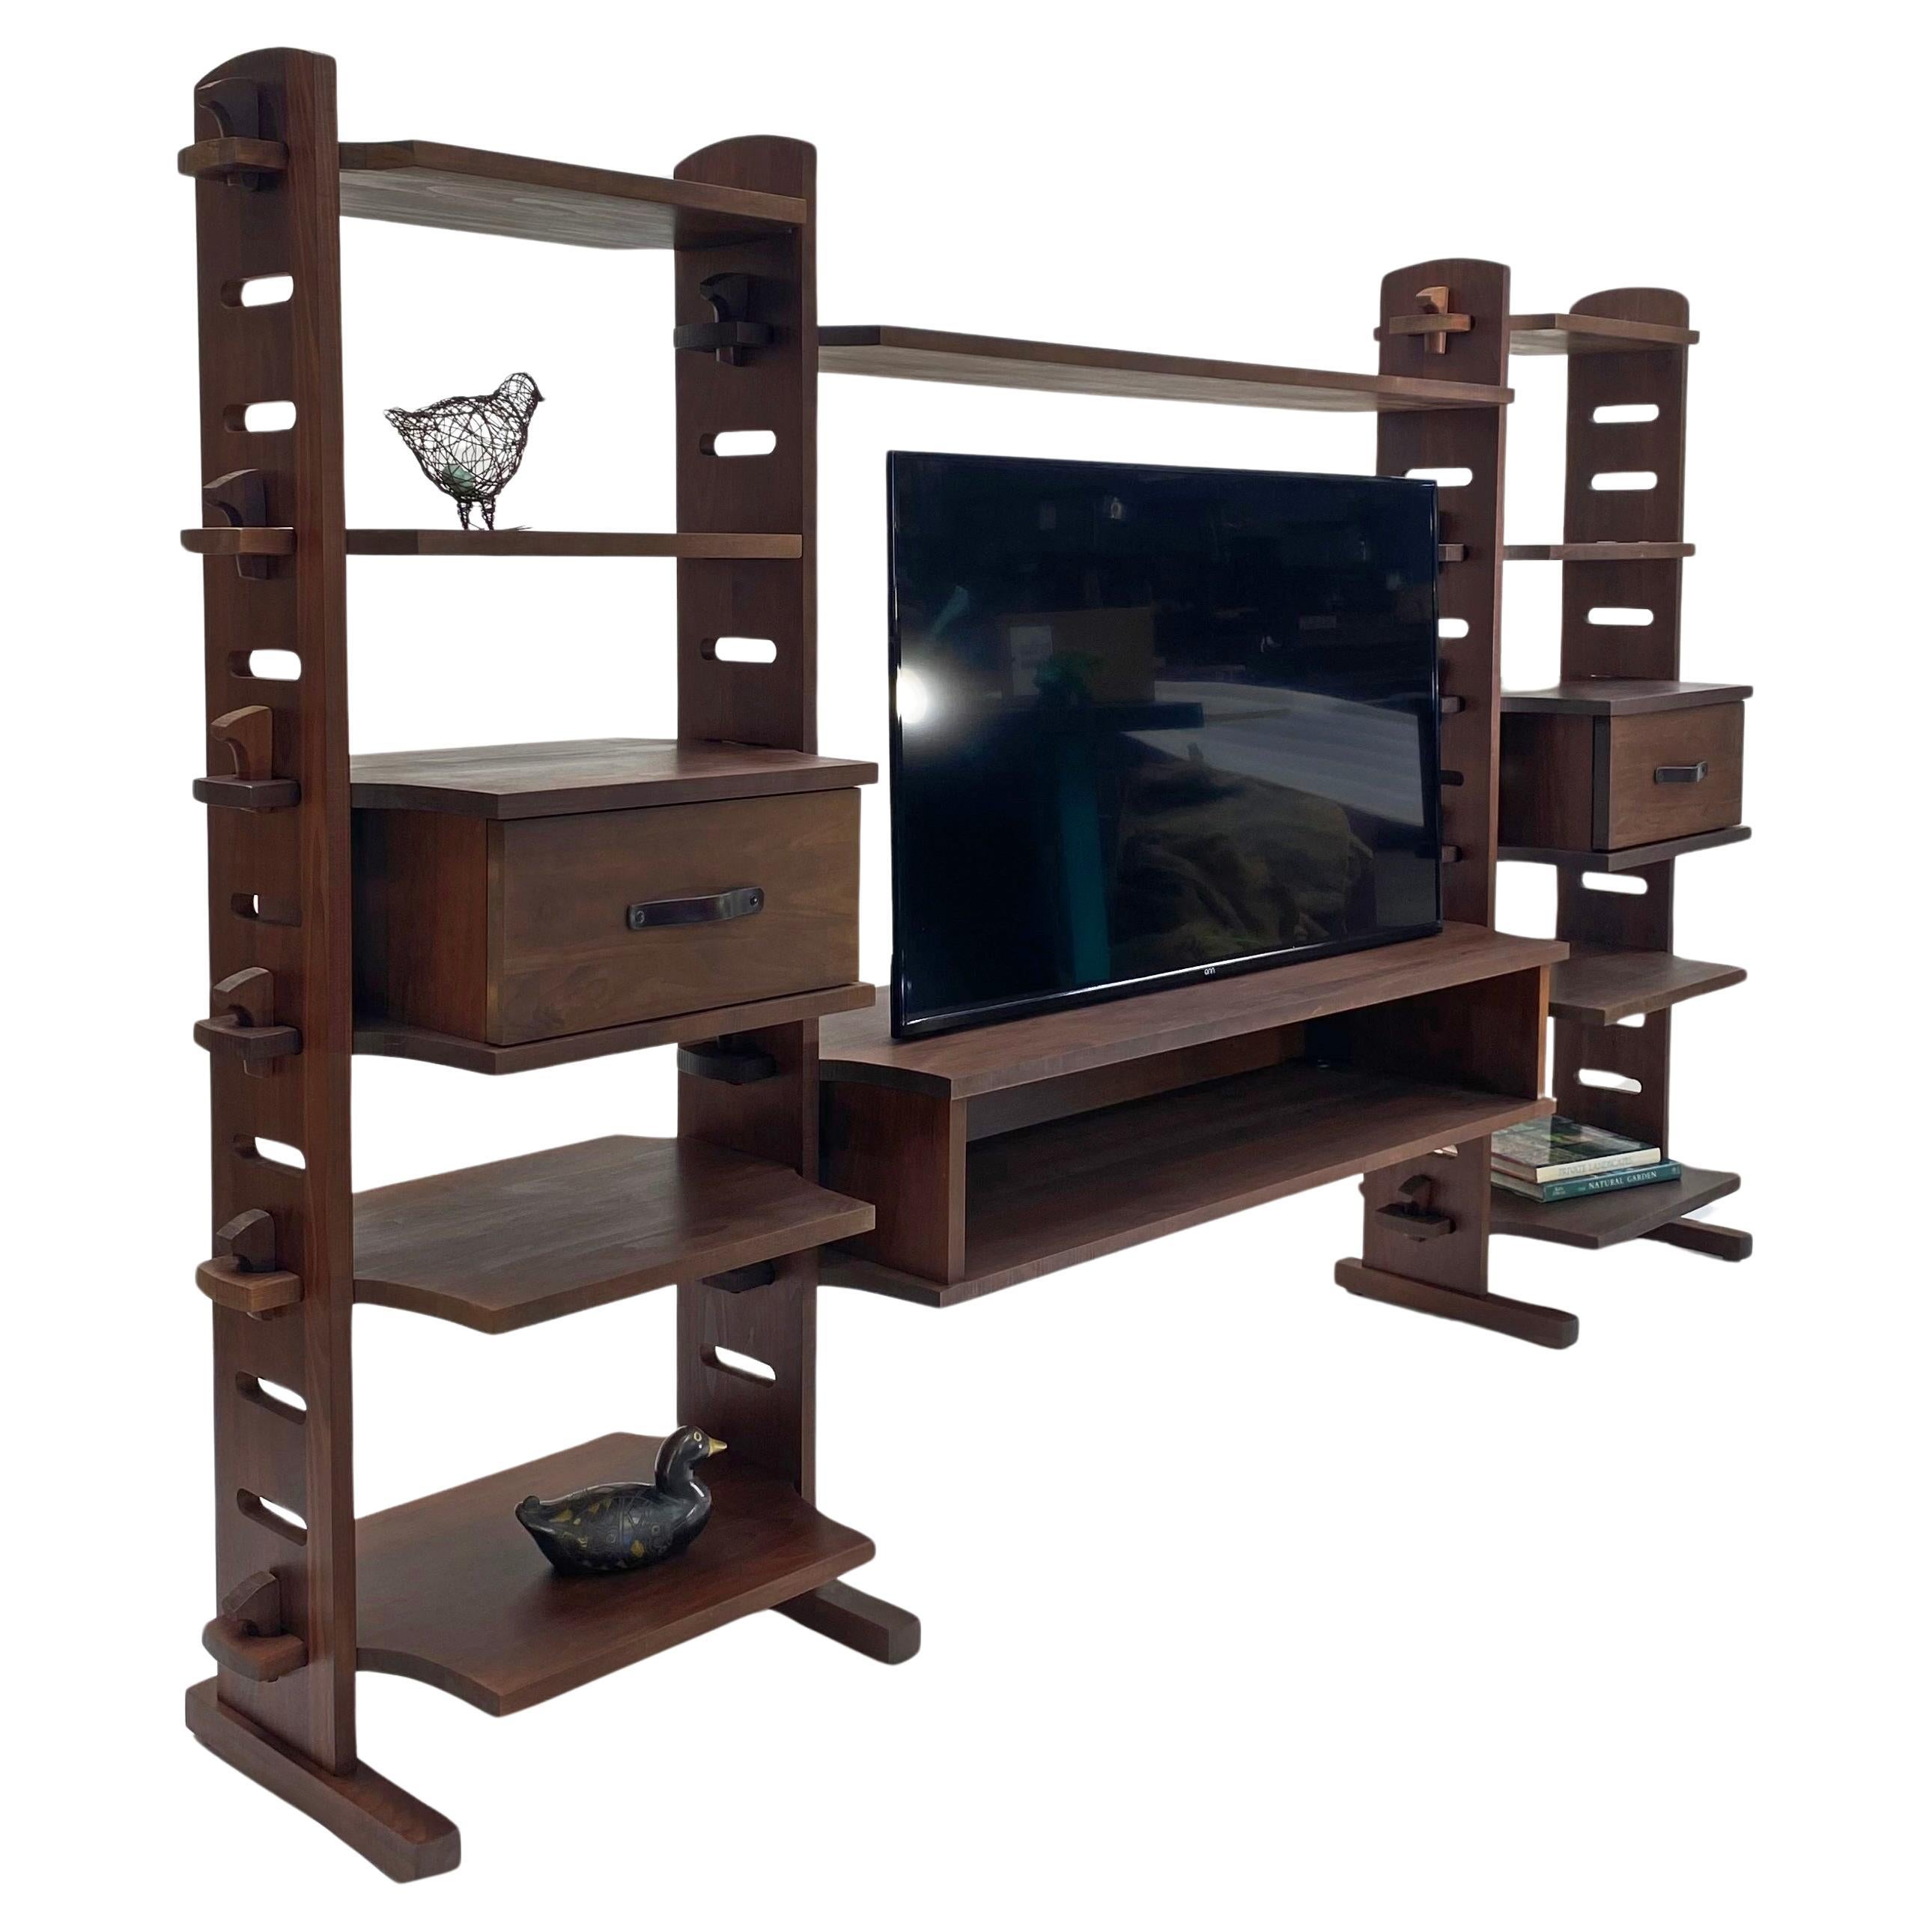 Amazing Midcentury wall unit handcrafted in solid aspen hardwood with exceptional quality and strength.. Featuring expertly carved wood with perfect proportions and captivating design that will highlight your home and collection. This unque